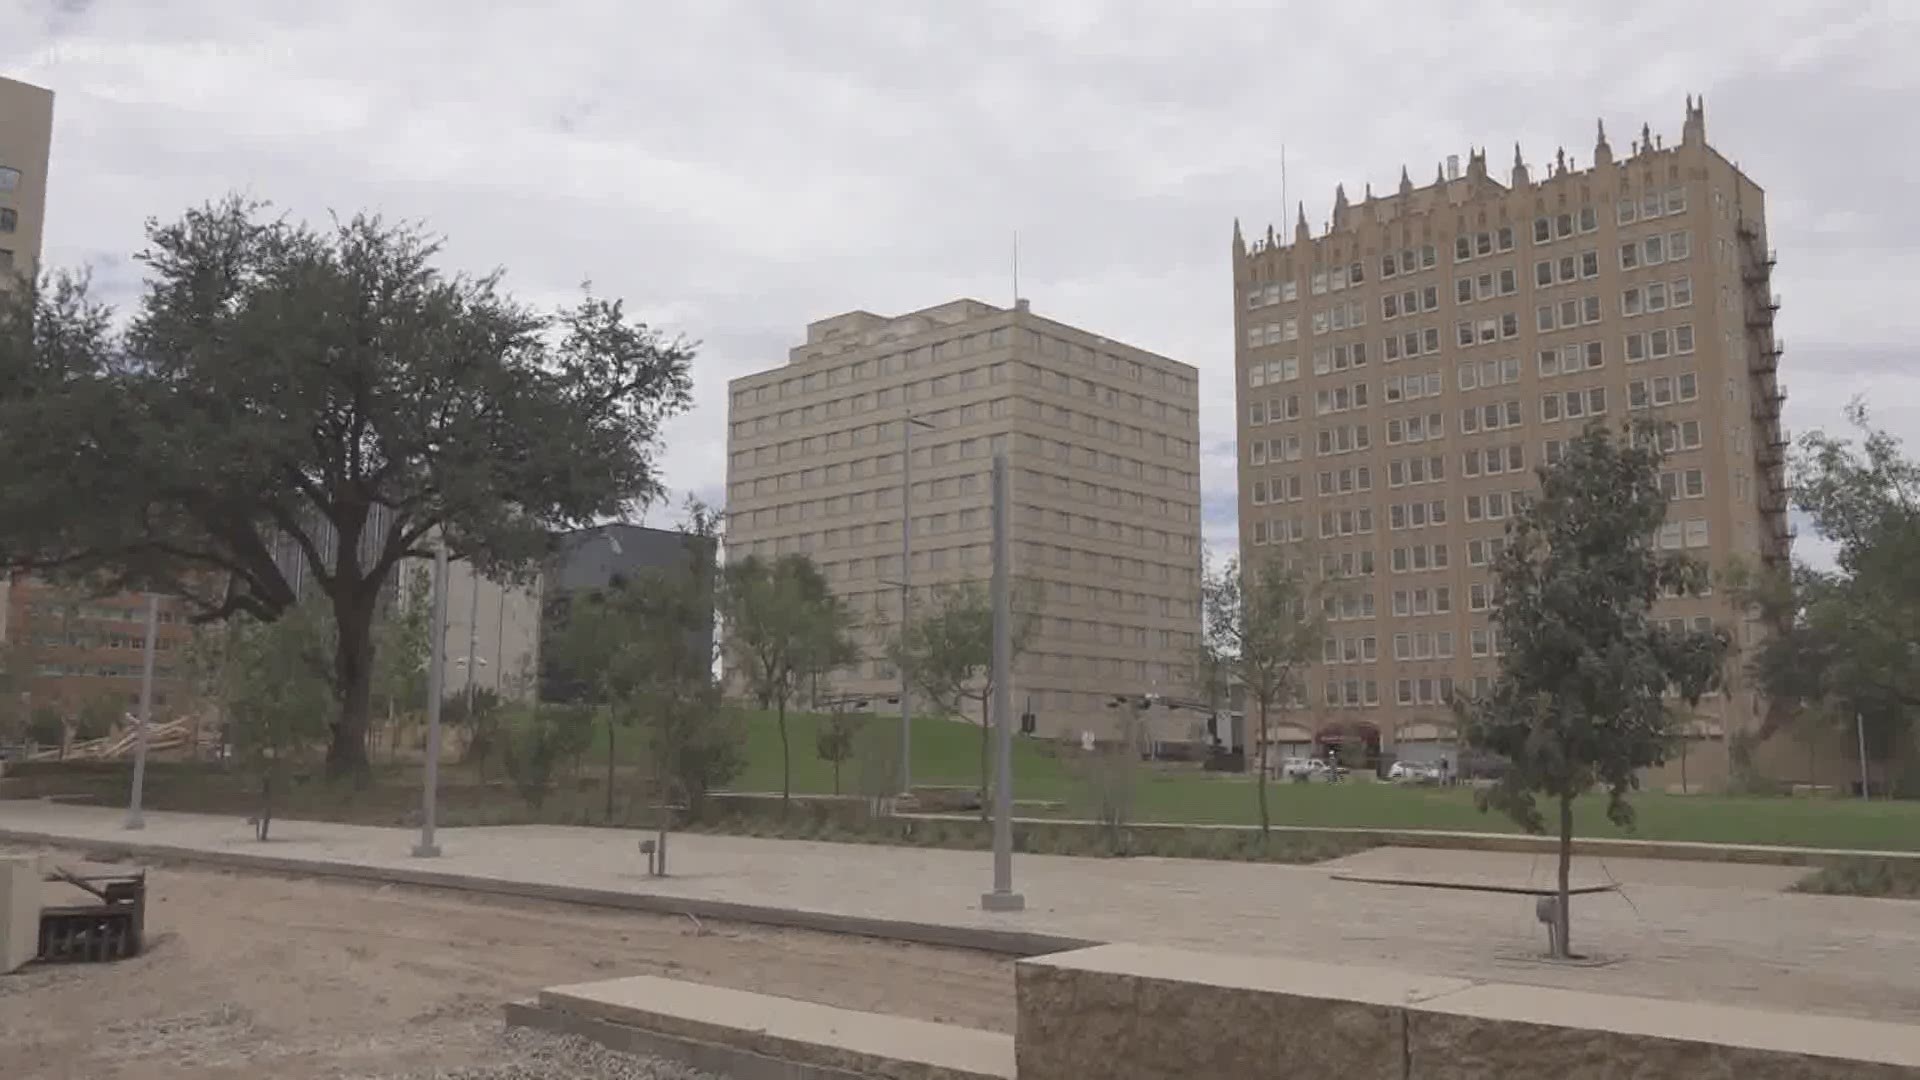 It has been in the works for three years and come October, West Texans will get to enjoy it.